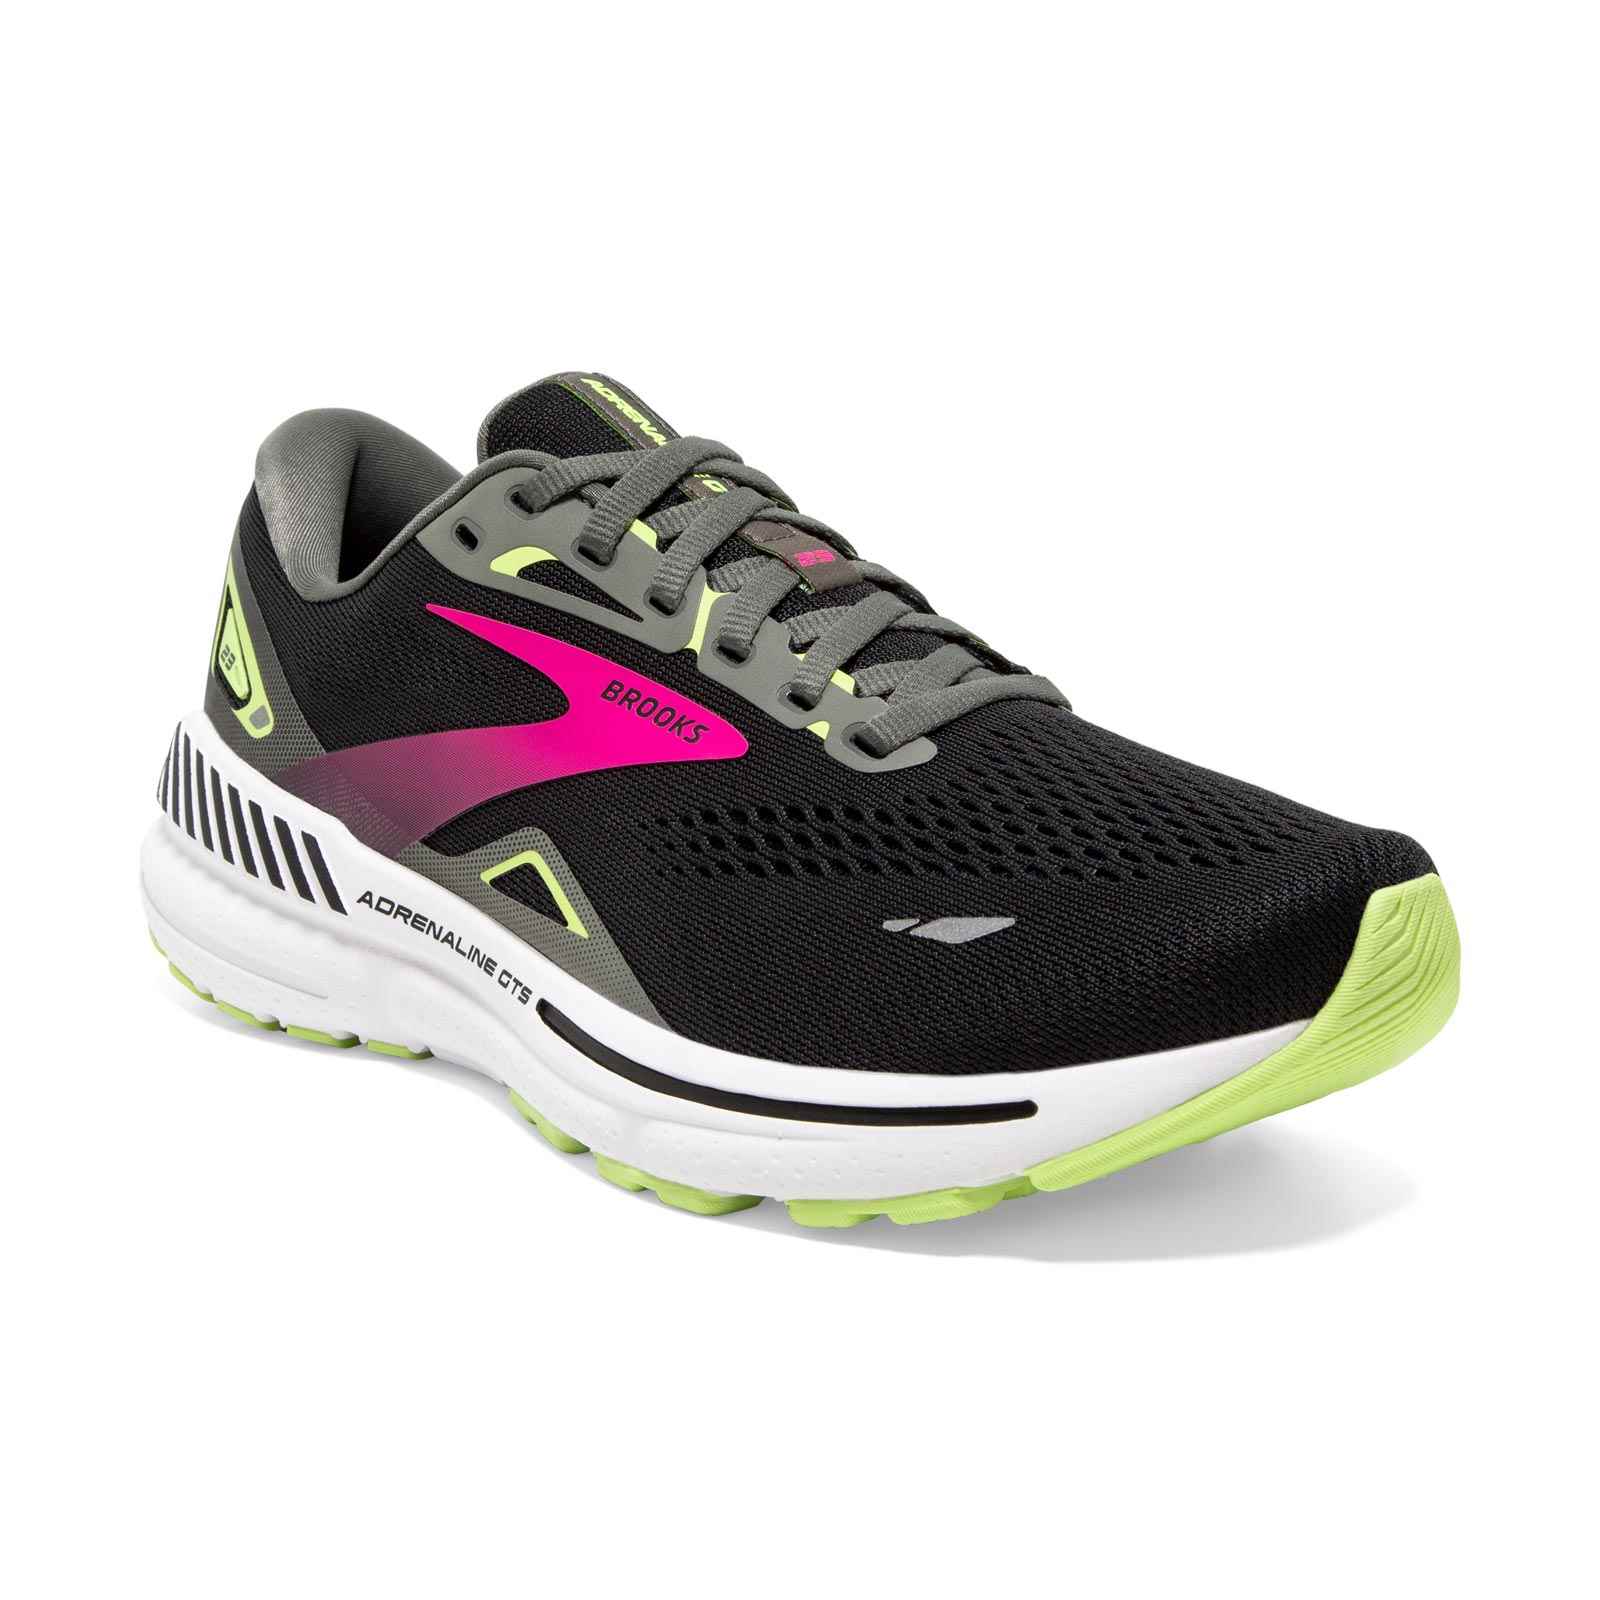 BROOKS ADRENALINE GTS 23 WOMENS RUNNING SHOES (WIDE-FIT)